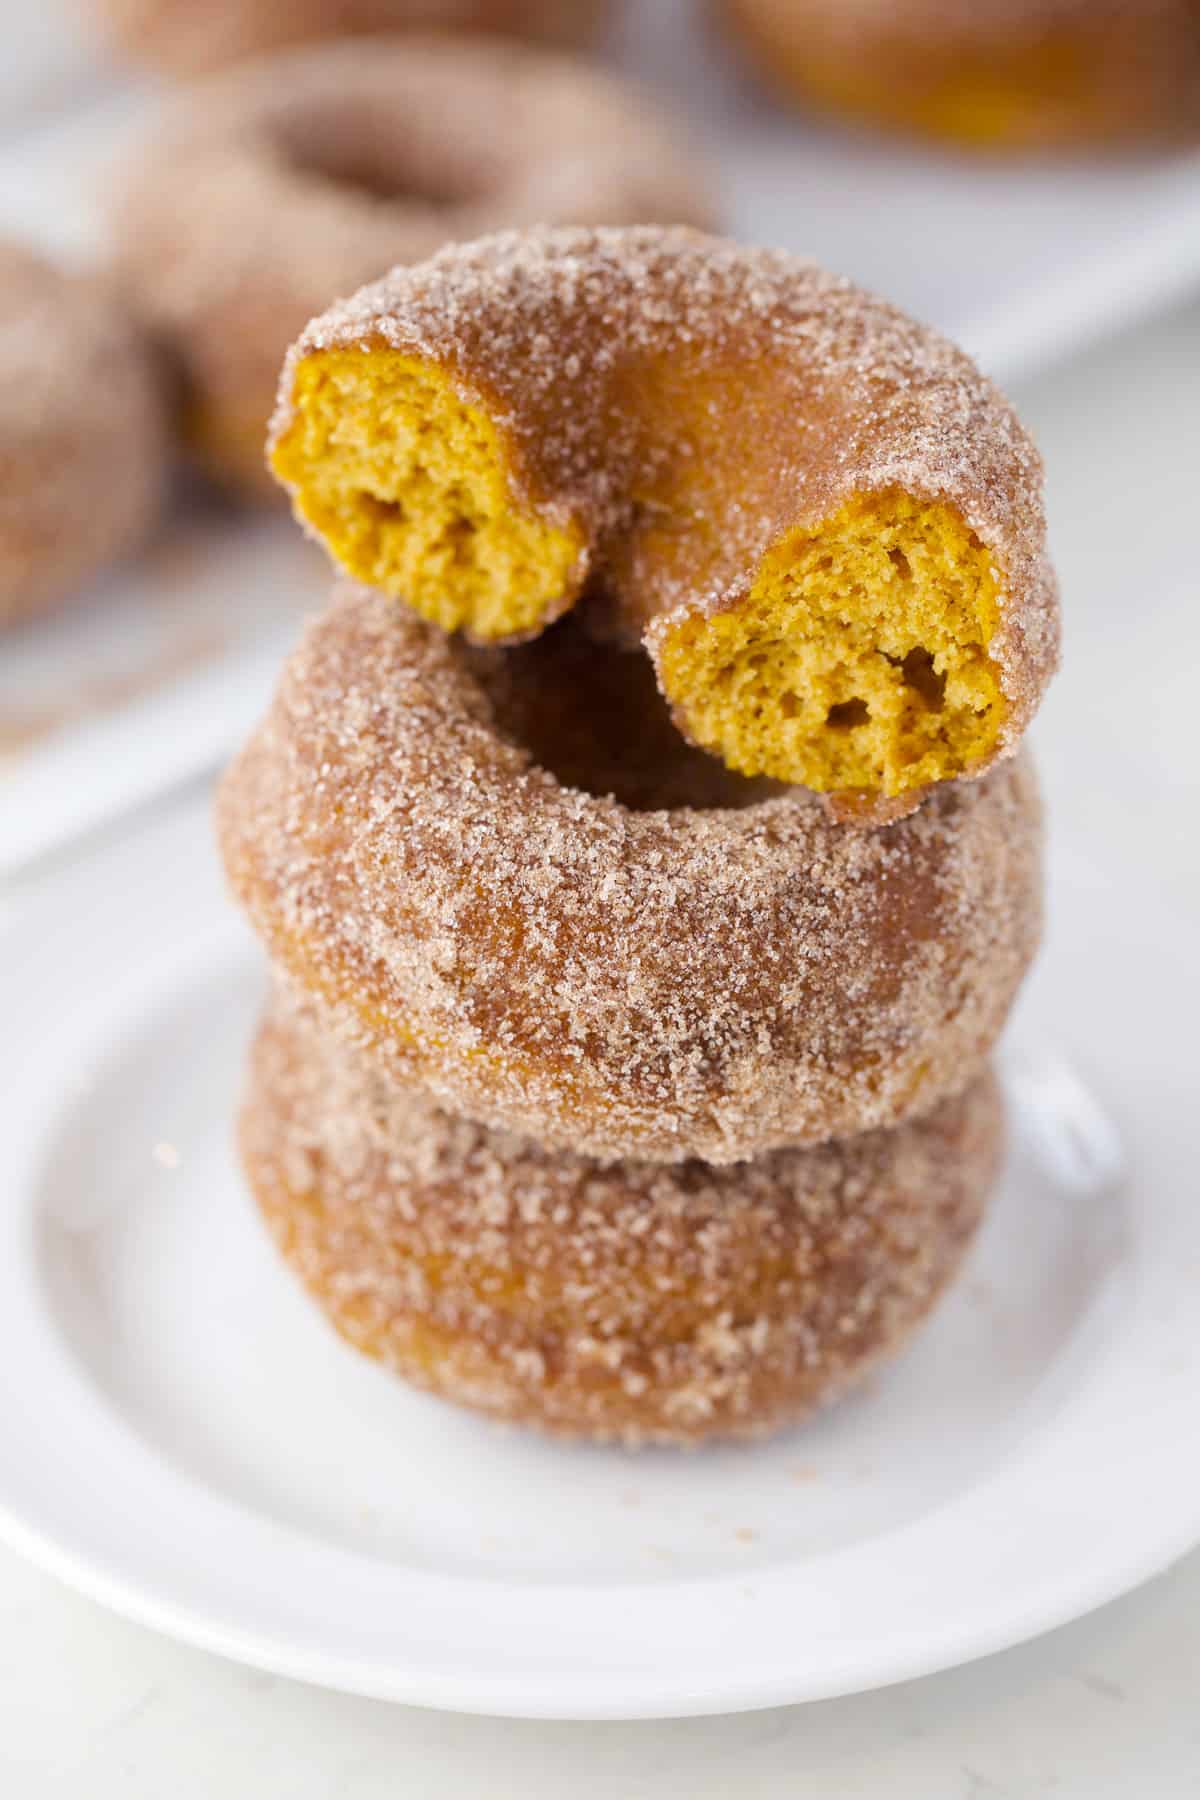 Stack of three baked donuts with top one having a bite.